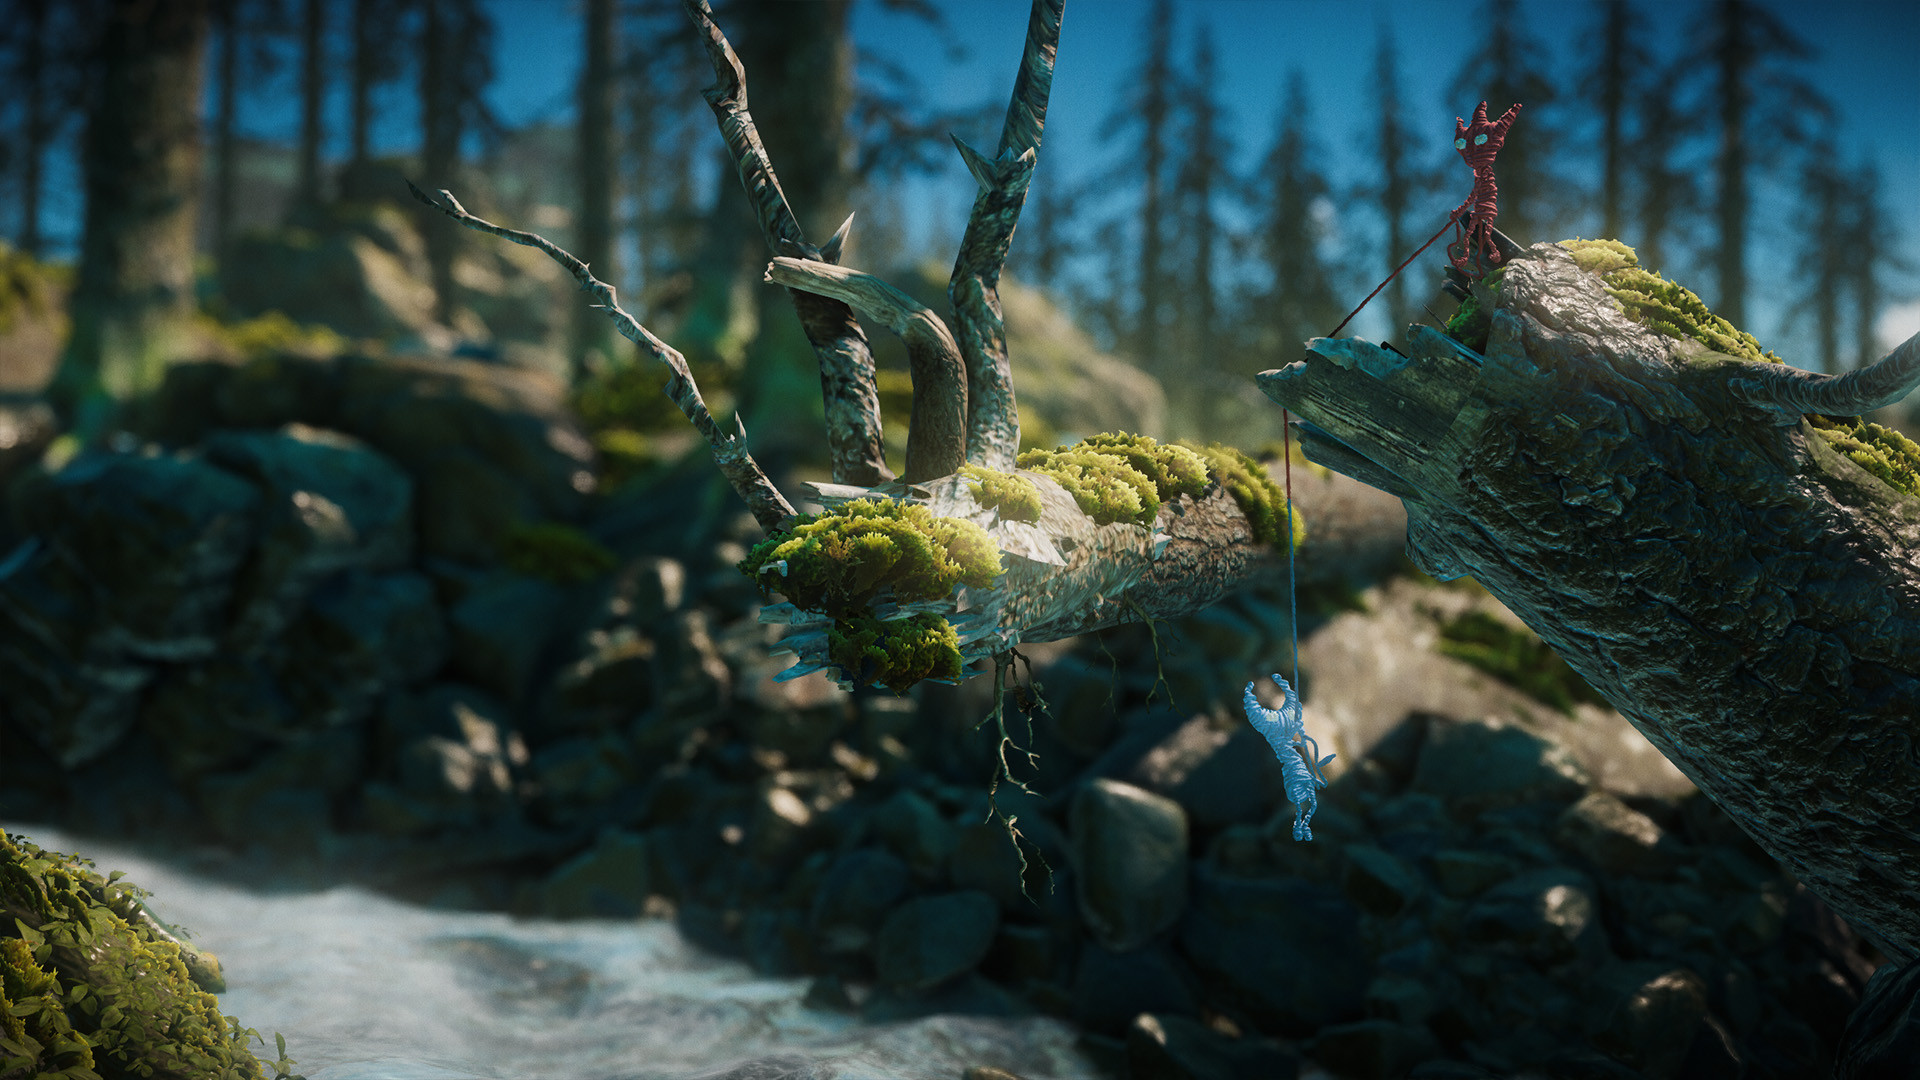 Unravel 2 is a perfect game to connect with loved ones - Polygon